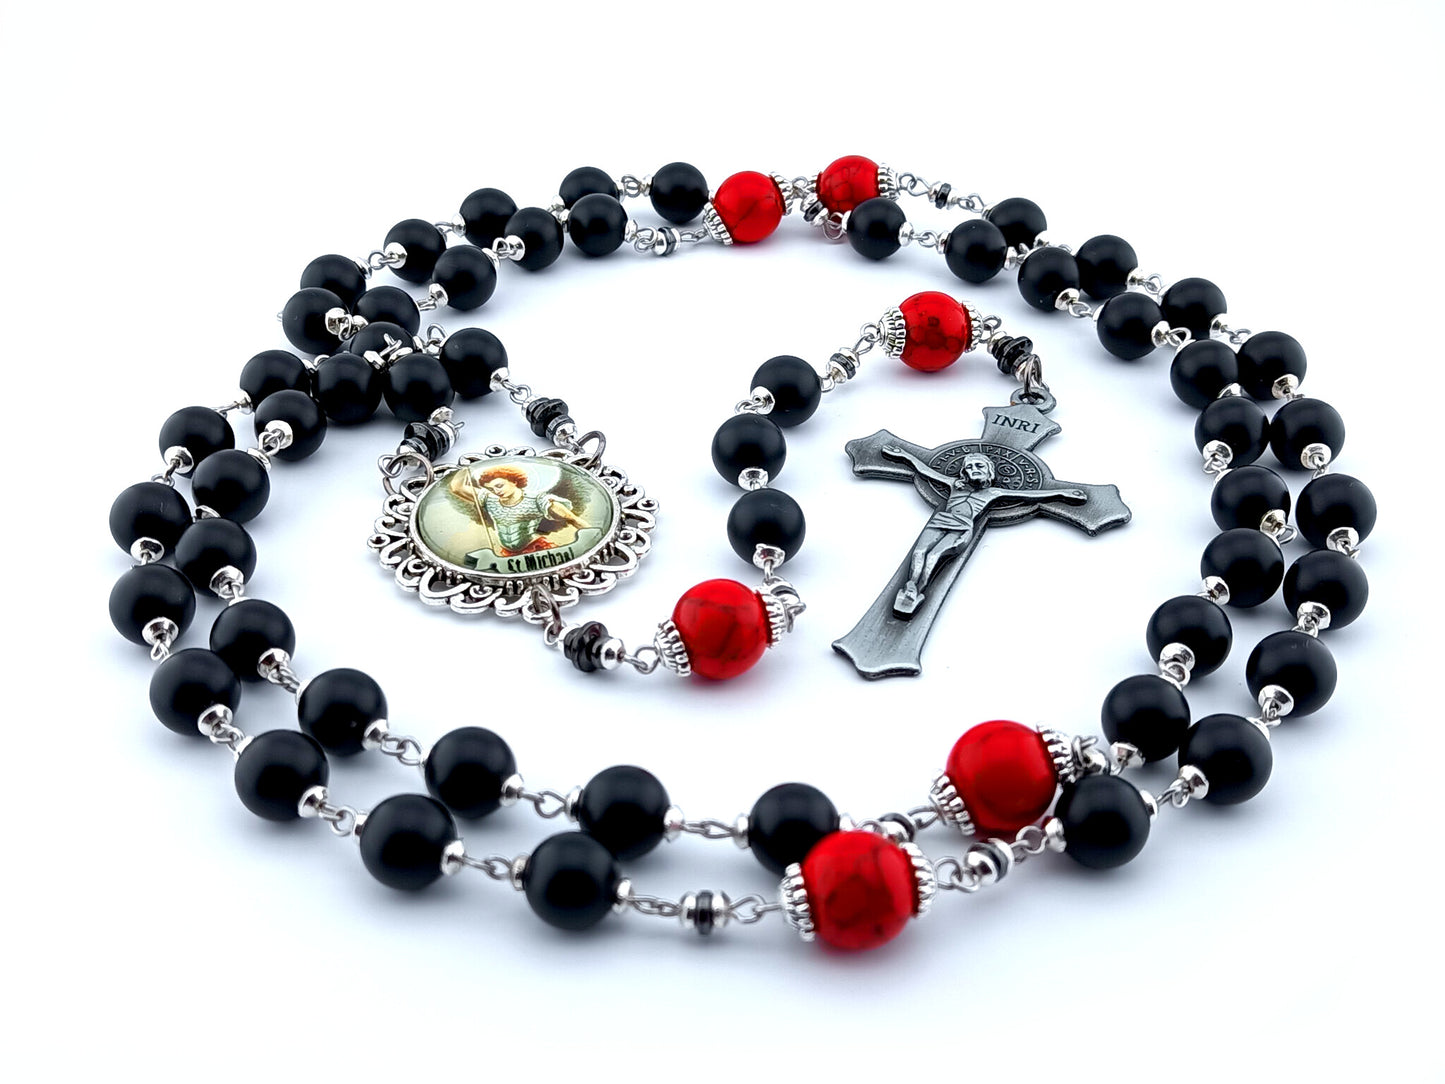 Saint Michael unique rosary beads with black matte onyx and red howlite beads, Saint benedict crucifix and silver picture centre medal.